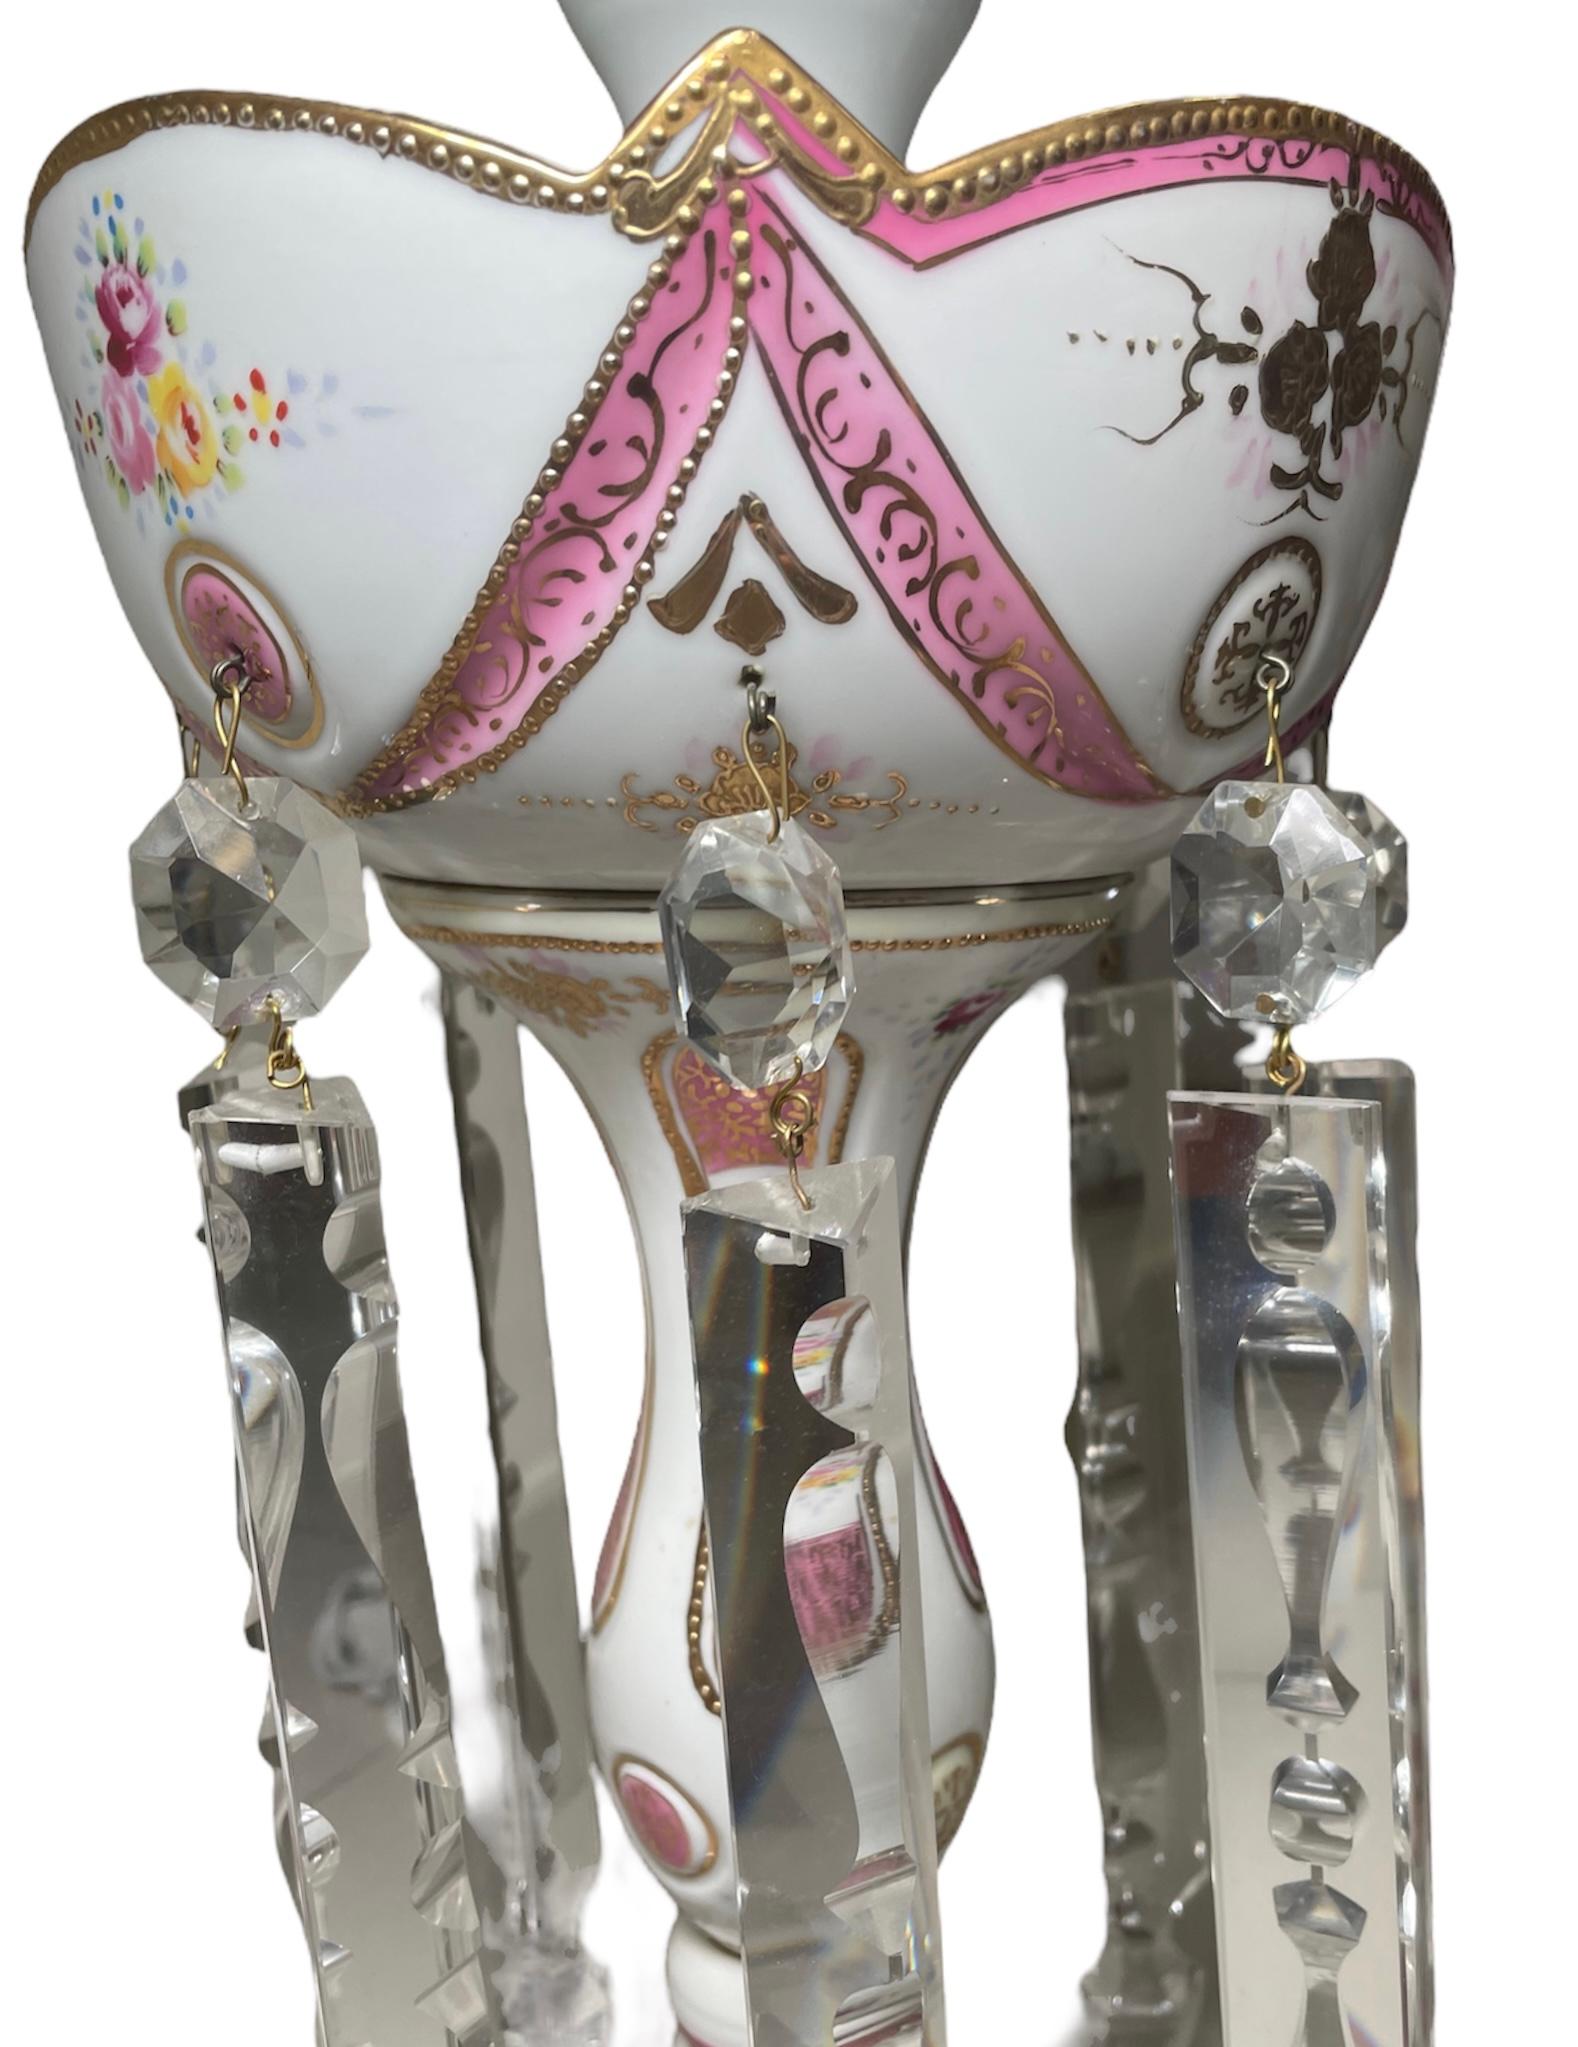 This is a Porcelain Mantle Luster Lamp. It depicts a lamp hand painted with a white background and enhanced by pink bands, garlands and circles with gilt details. A bouquet of roses also adorn the decor of the lamp. The upper border of the lamp is